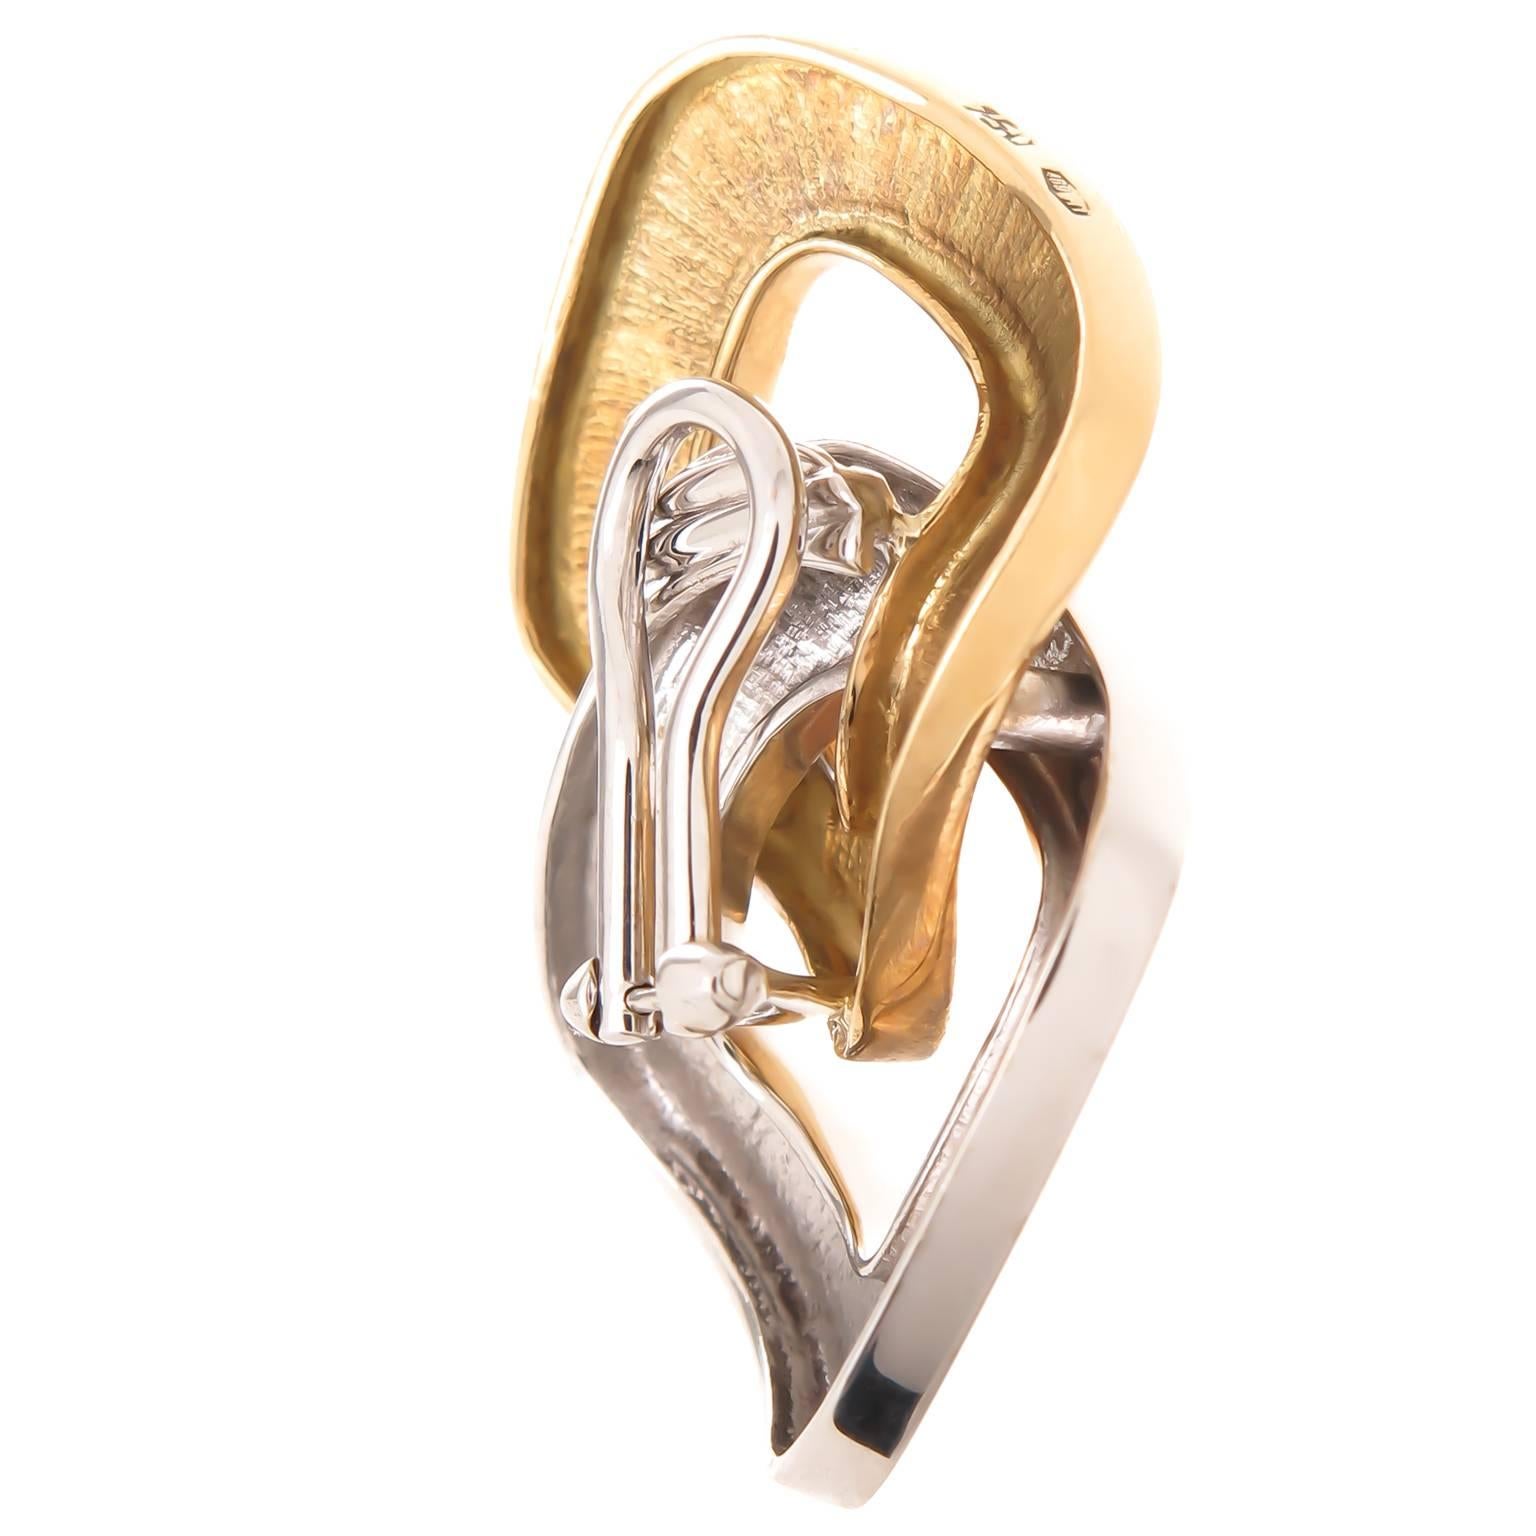 Circa 2012 Pomellato 18K White and Yellow Gold interlocking Cushion link Ear Clips. Measuring 1 1/2 inch in length and 1 inch wide. Having an Omega Clip back to which a post can be easily added if desired. 